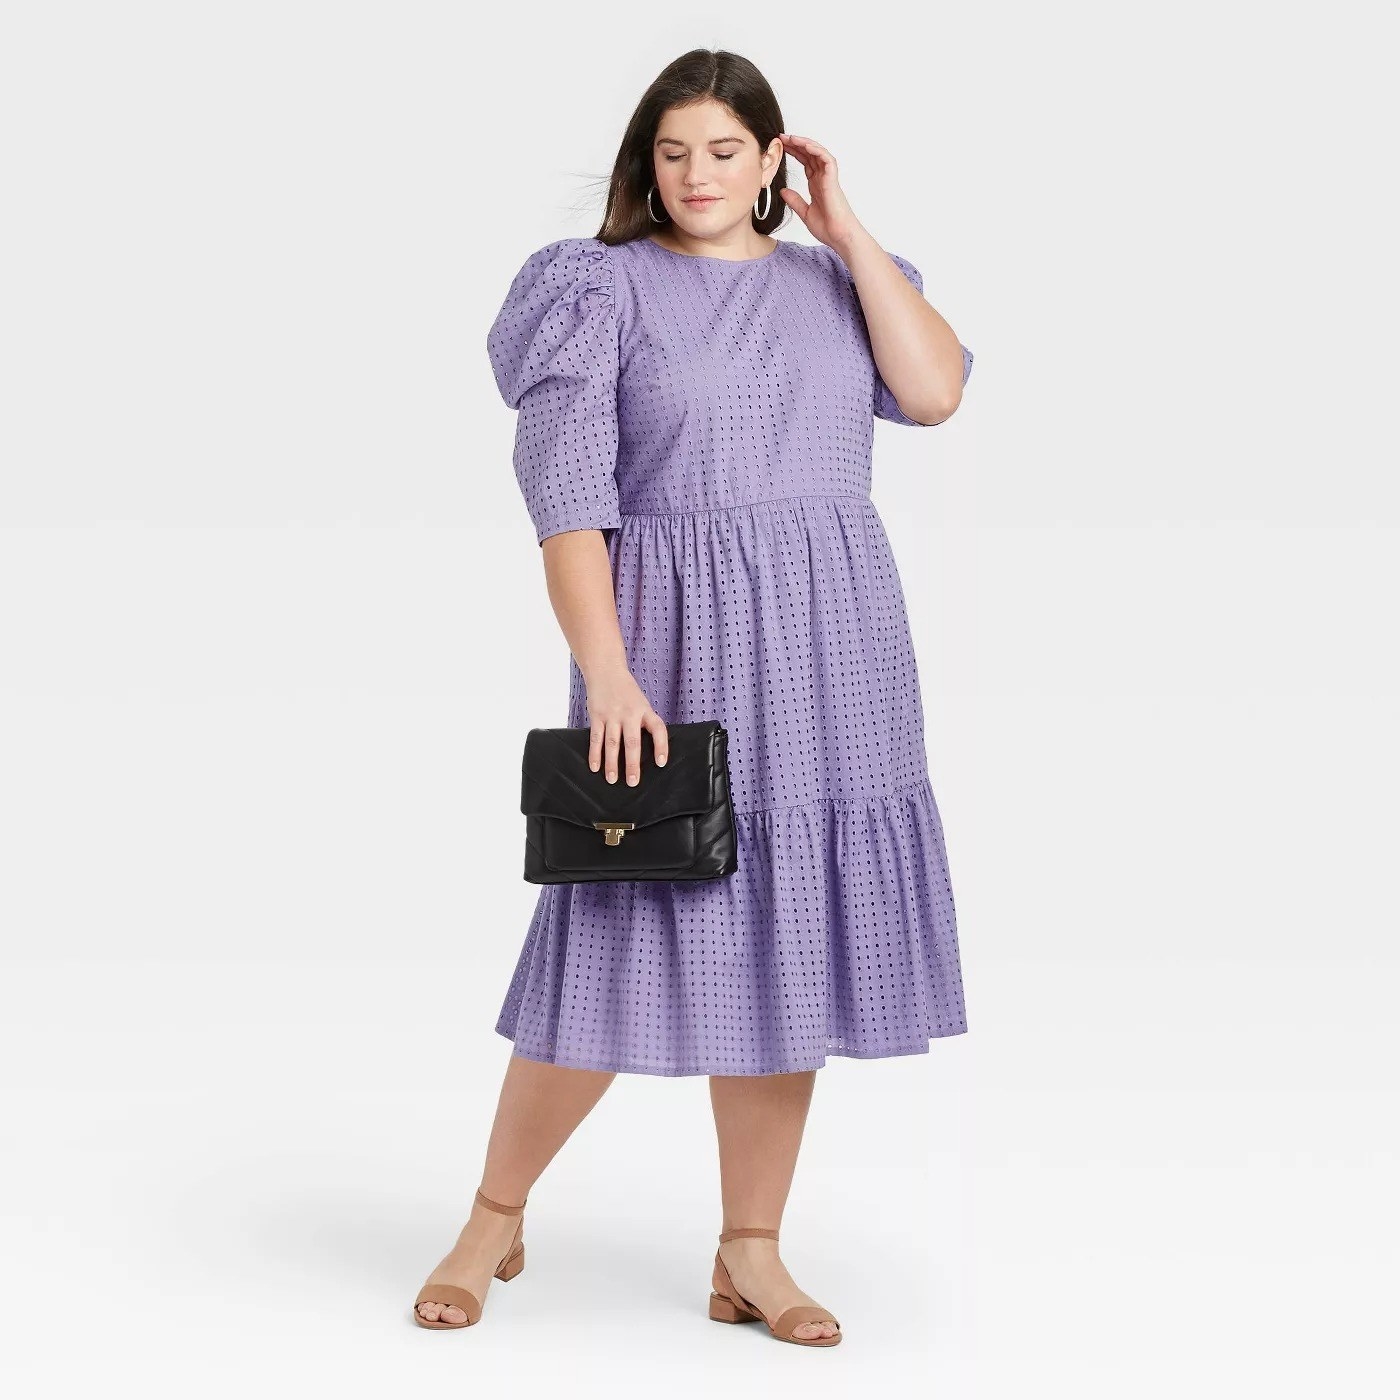 Model wearing lilac midi dress with 3/4 sleeves